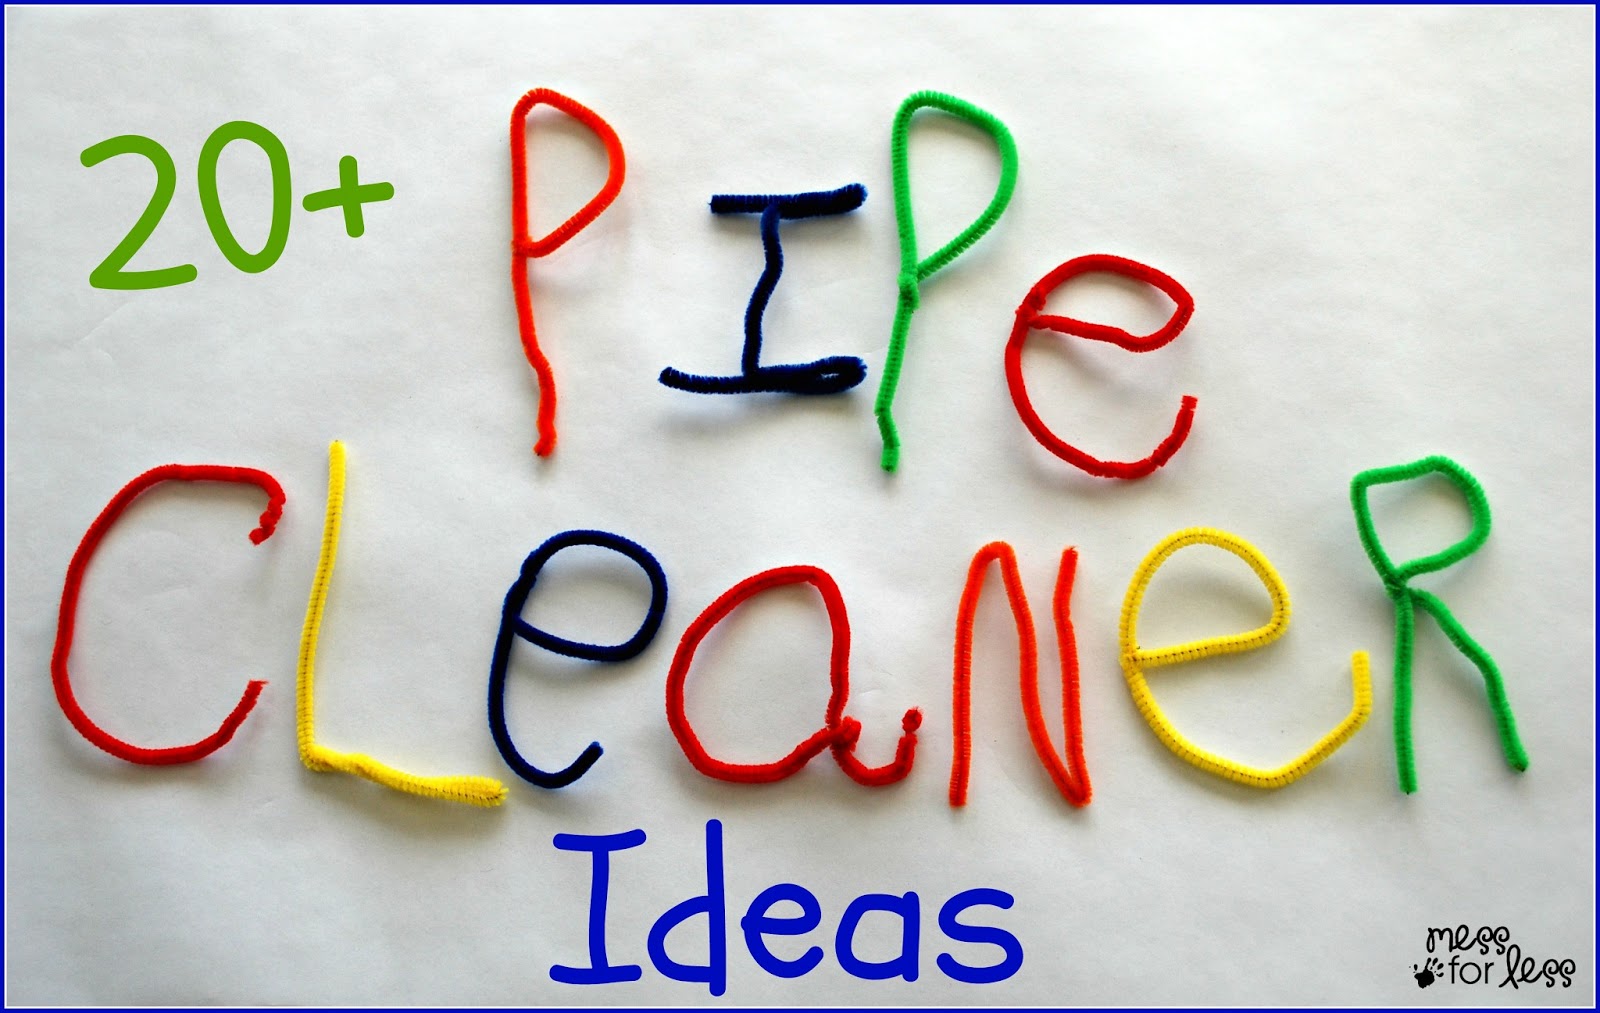 Pipe_cleaner_crafts - Promise the Children